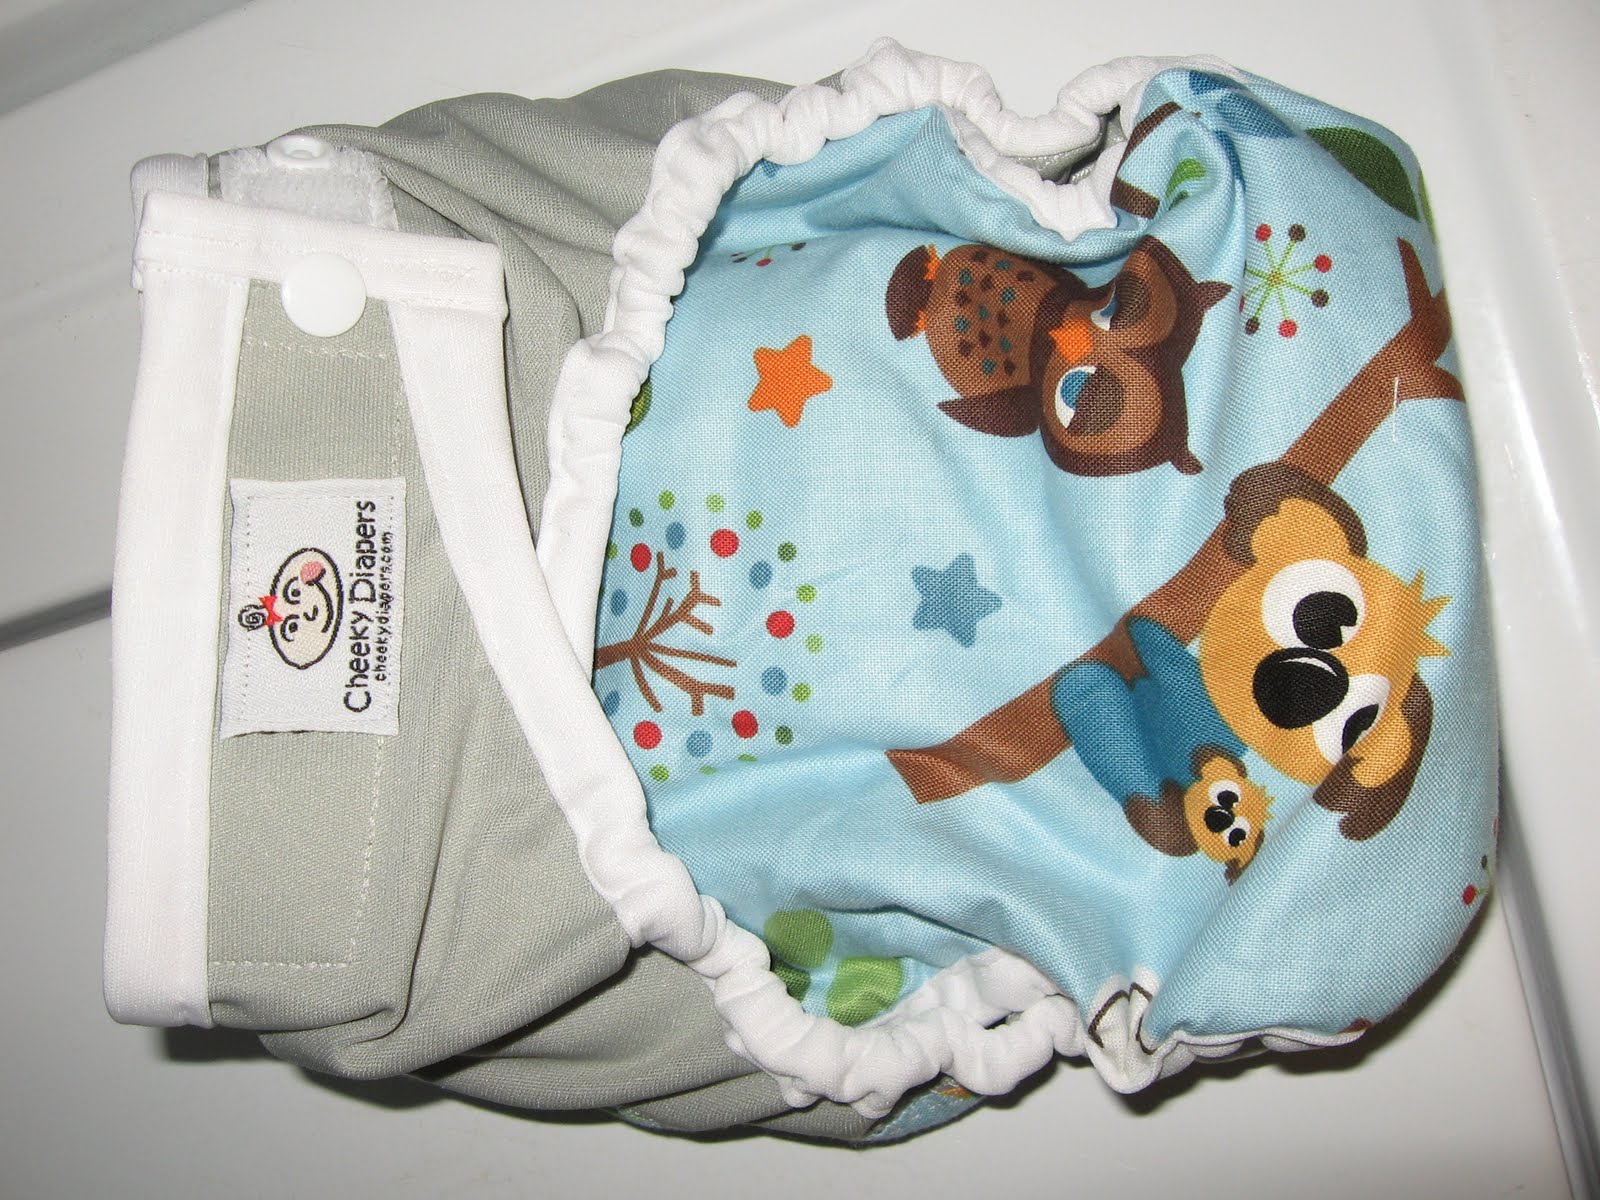 Cloth Diaper Addiction: Under Cover Month - Getting Close